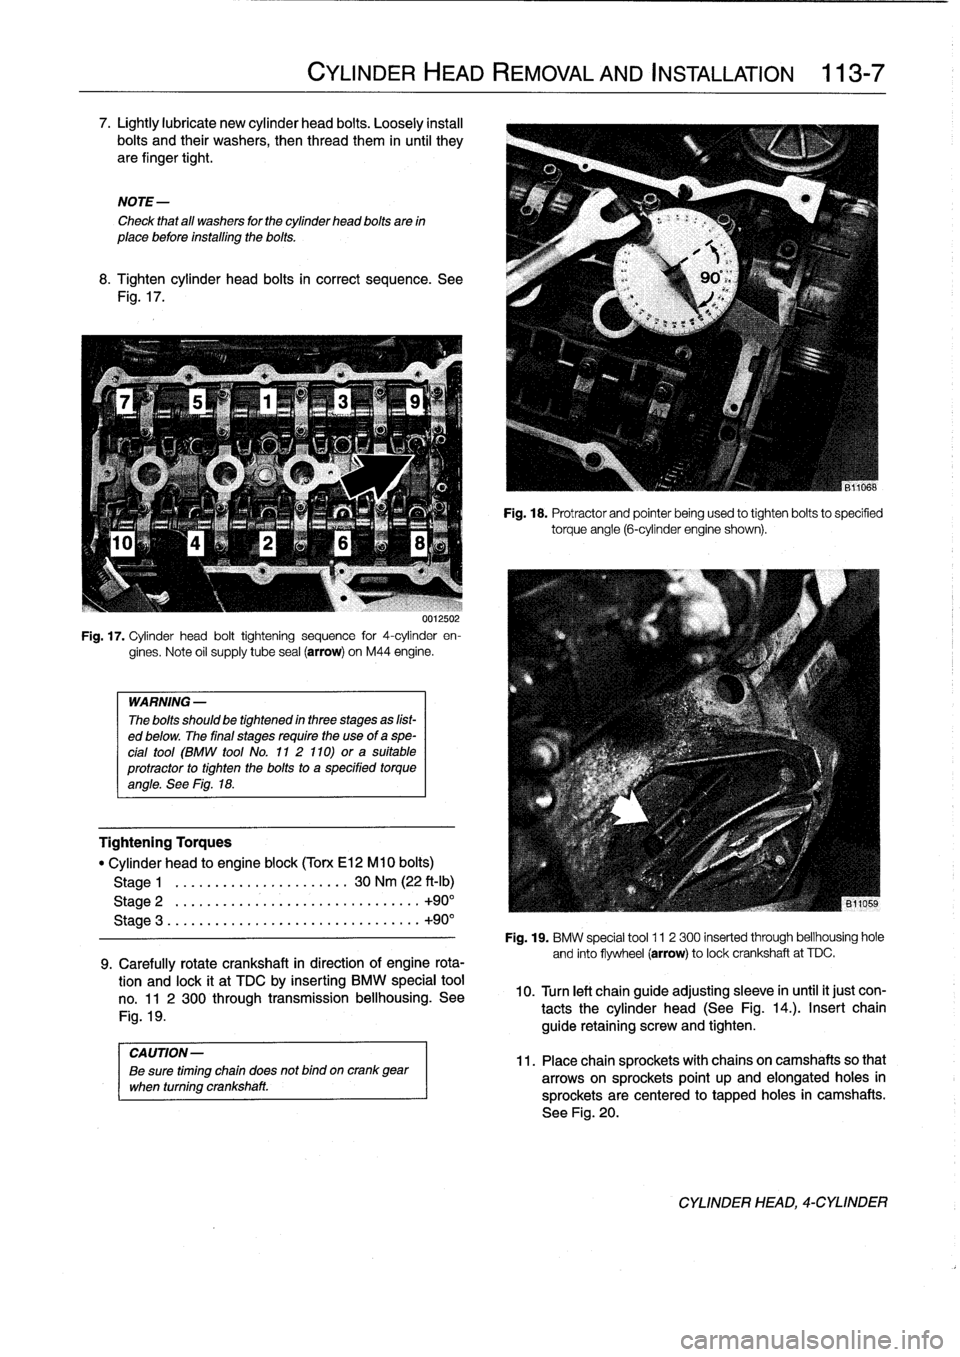 BMW 318i 1997 E36 Workshop Manual 
7
.
Lightly
lubricate
new
cylinder
head
bolts
.
Loosely
instan
bolts
and
their
washers,
then
thread
them
in
until
they
are
finger
tight
.

NOTE-

Check
that
all
washers
for
the
cylinder
head
bolts
ar